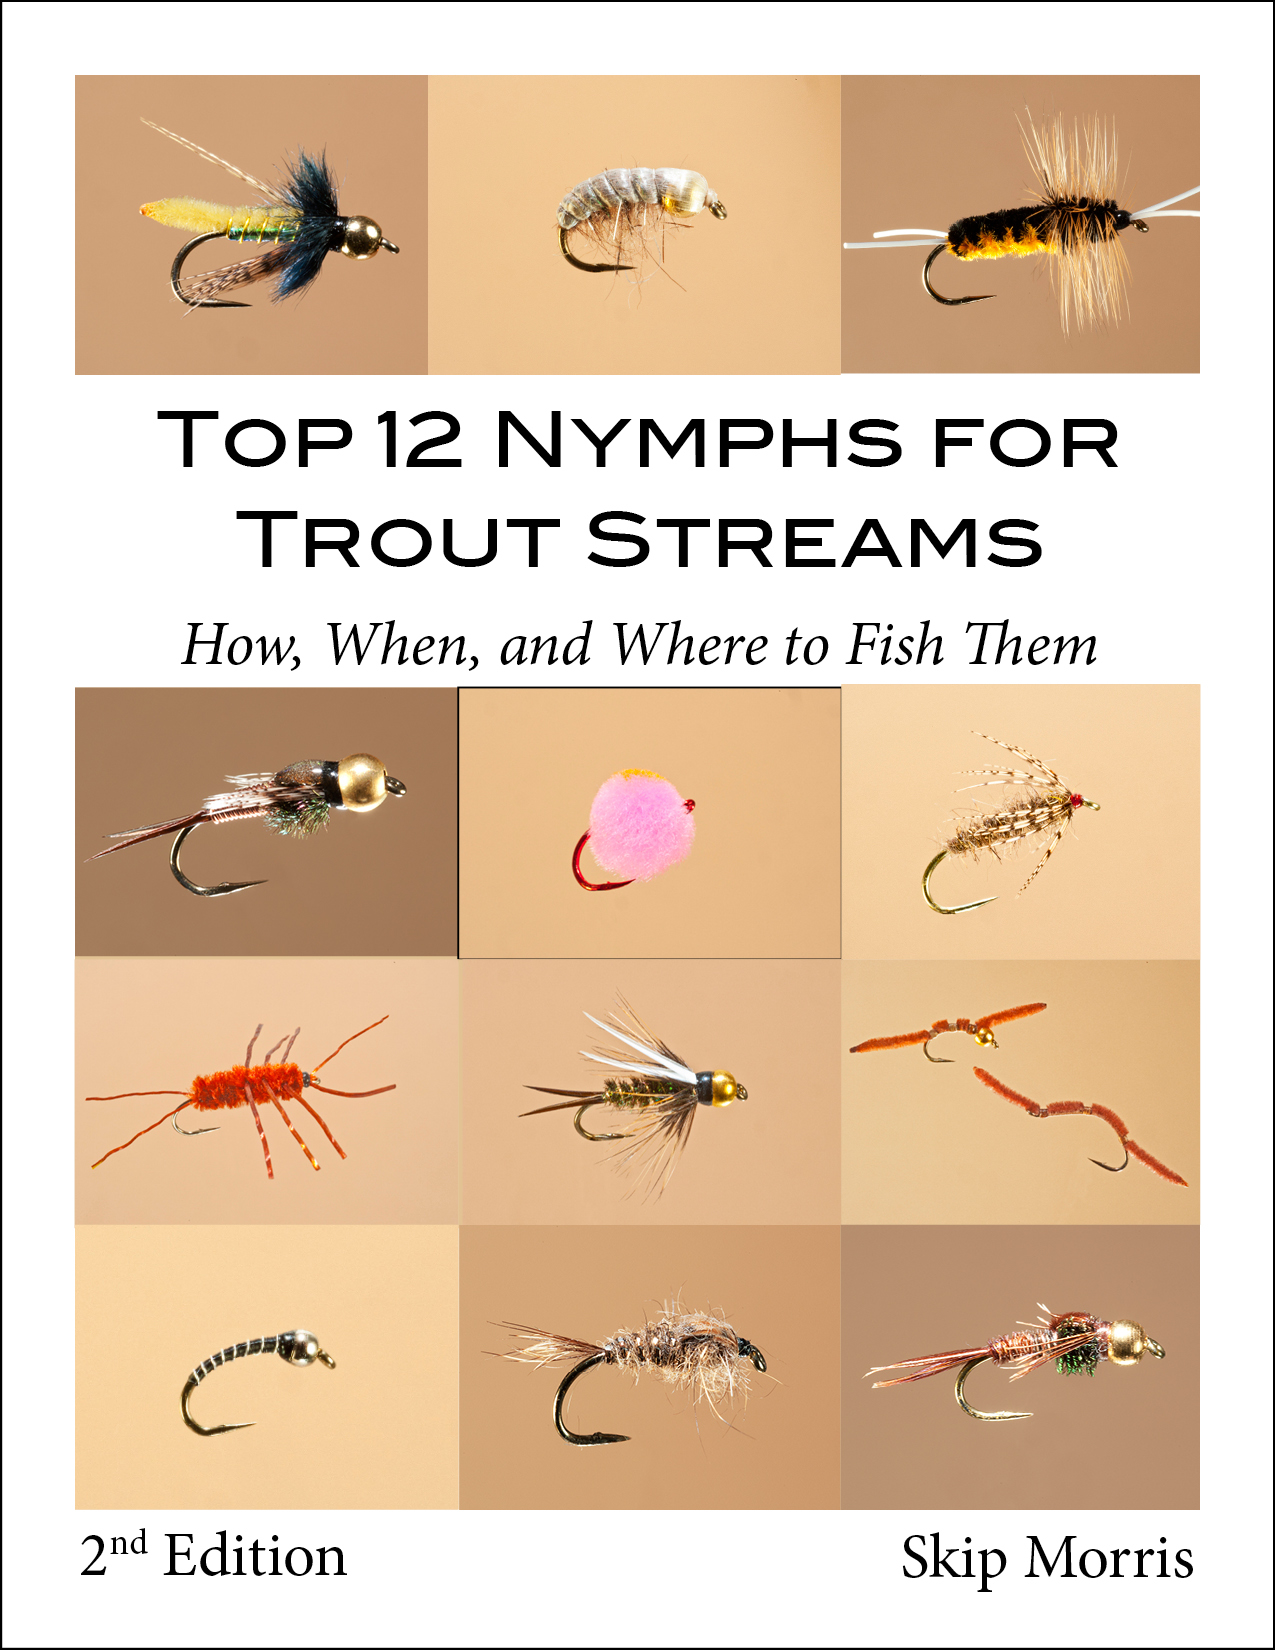 Top 12 Nymphs for Trout Streams: How, When, and Where to Fish Them, 2nd Edition